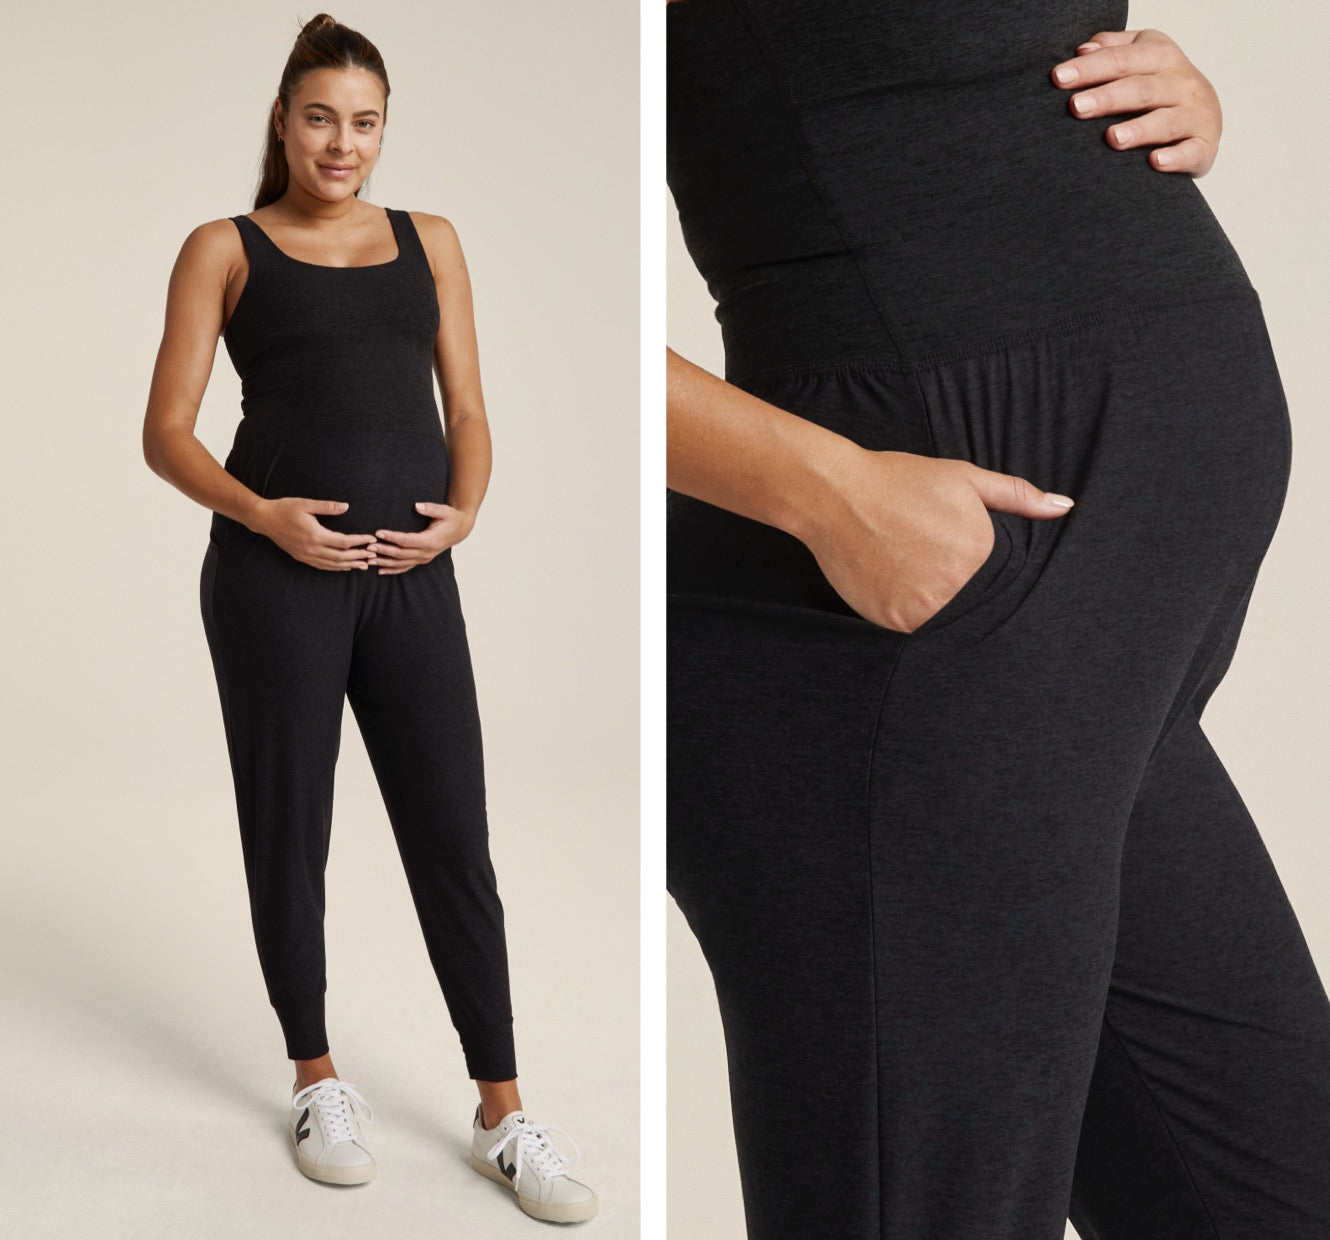 Beyond Yoga Maternity Textured Athletic Apparel for Women